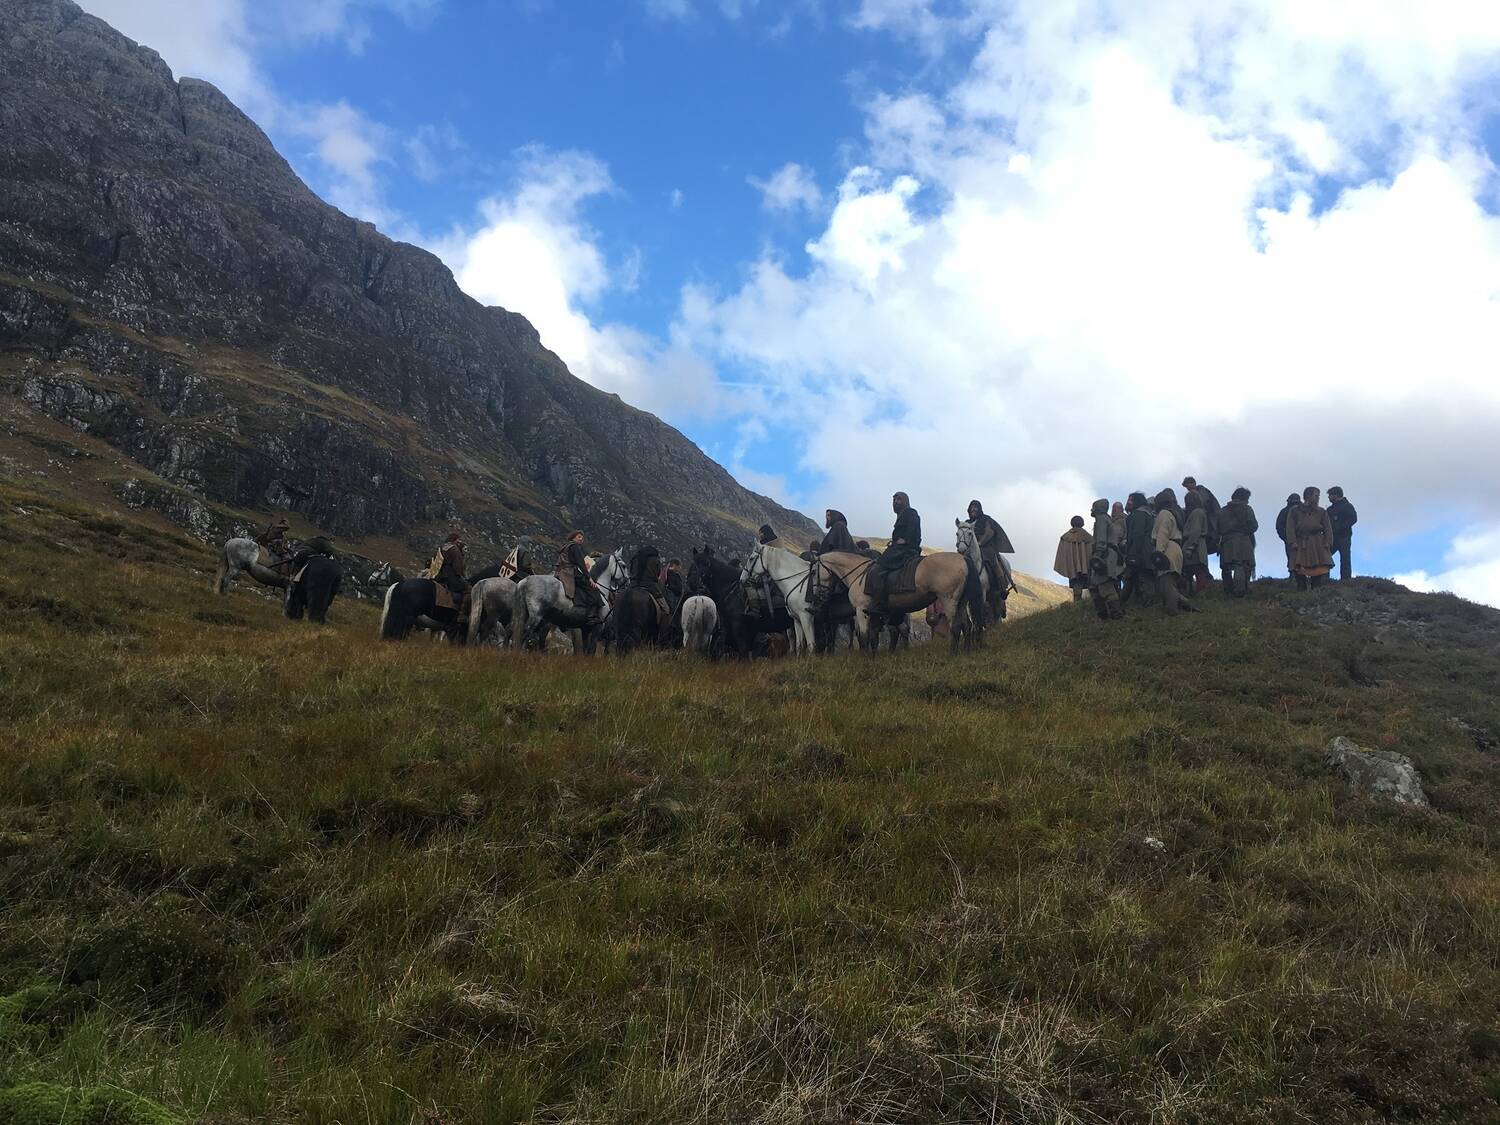 A large group of actors, many on horseback, stand on a ridge with a mountain backdrop. White clouds scatter across a blue sky.